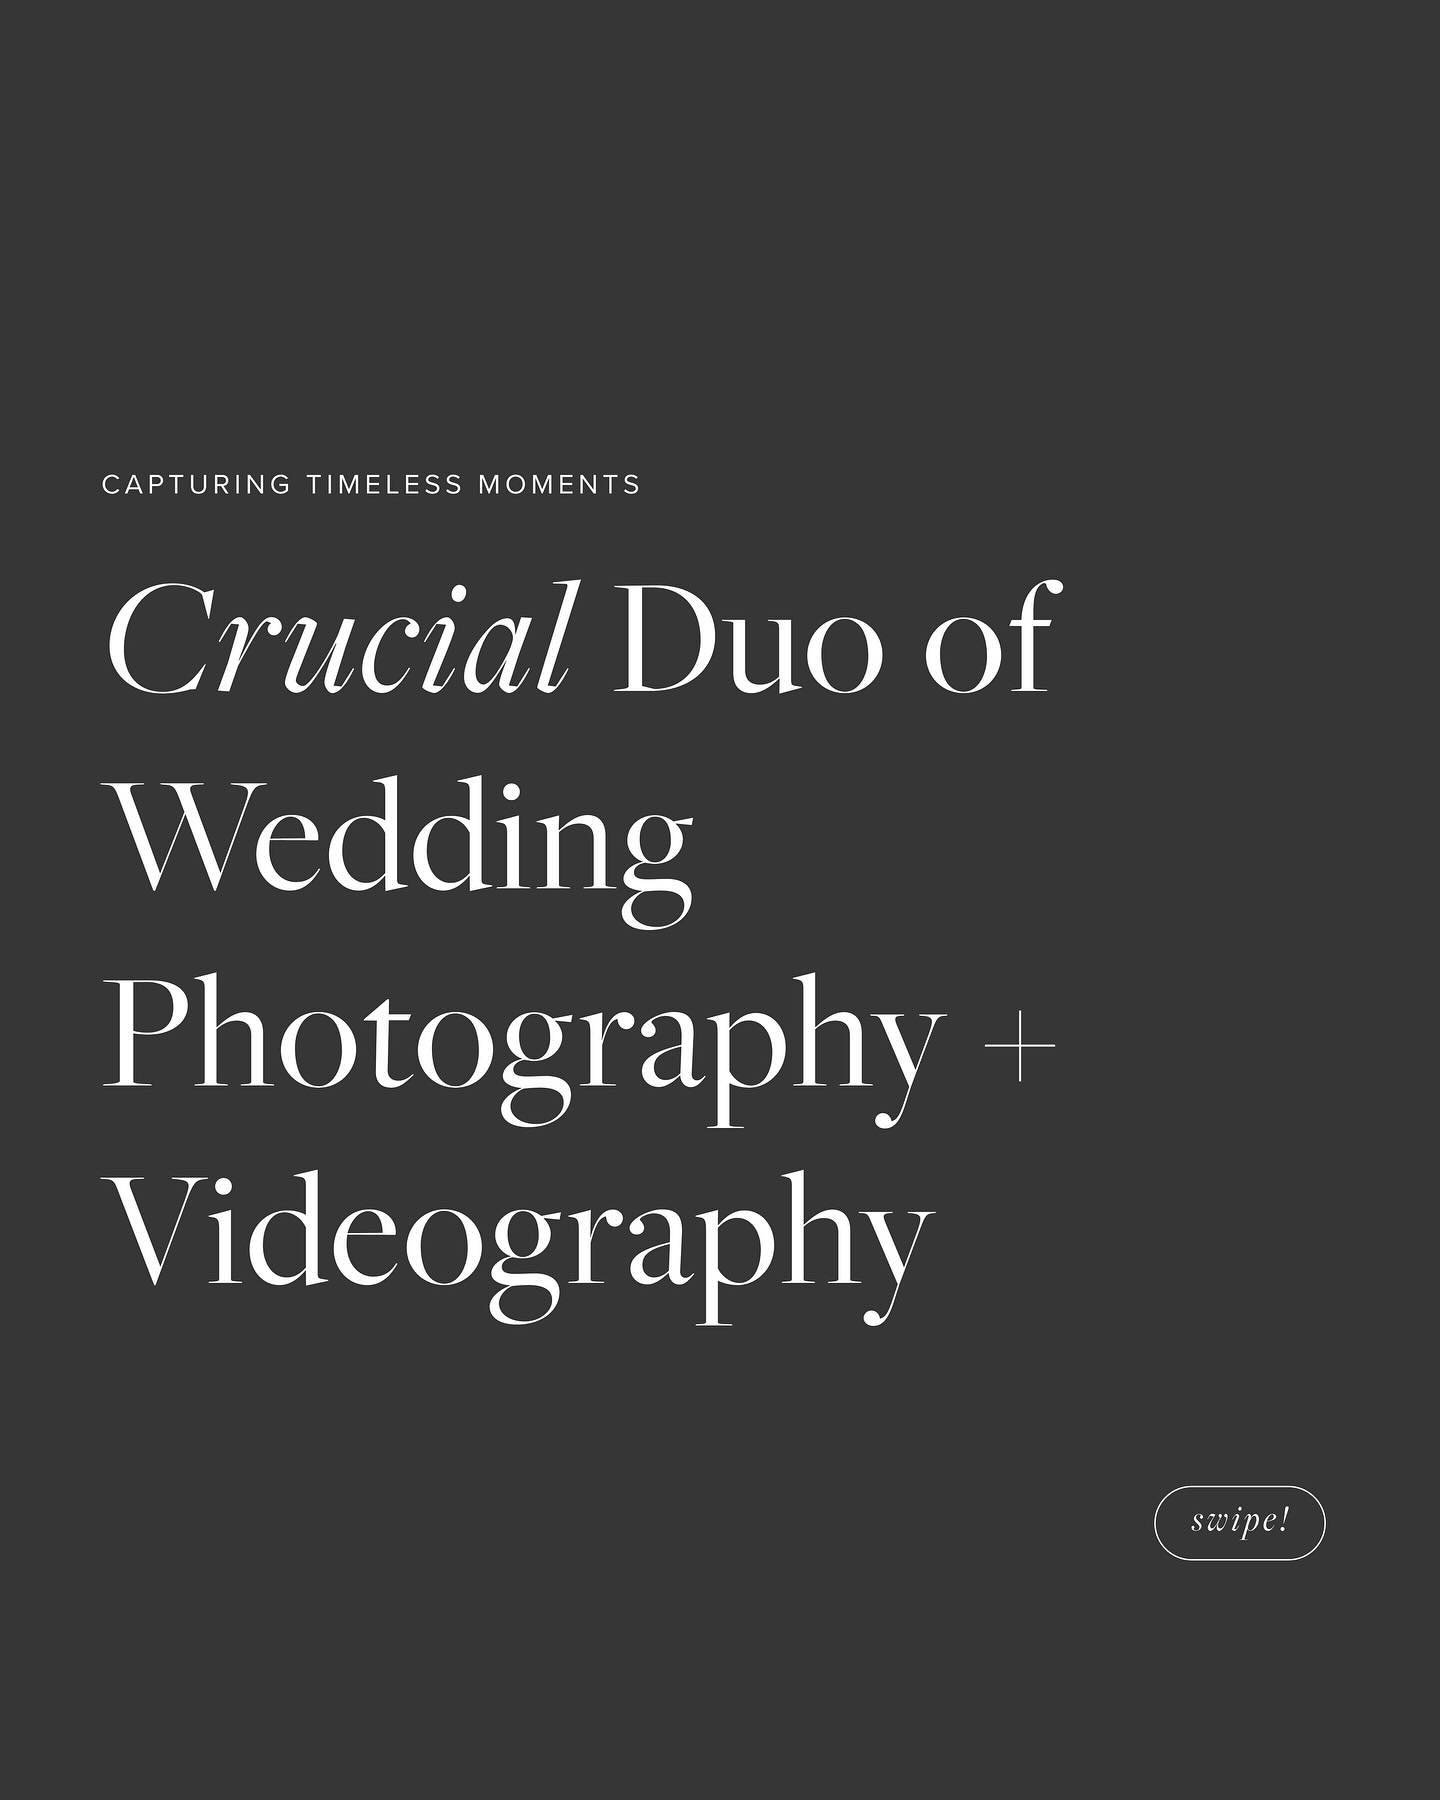 Why should you have both photography and videography at your wedding?

We&rsquo;ll for one&hellip;It&rsquo;s one, of if not THE most important day of your life&hellip;why would you NOT want both to look back on? But here&rsquo;s a couple reasons why: